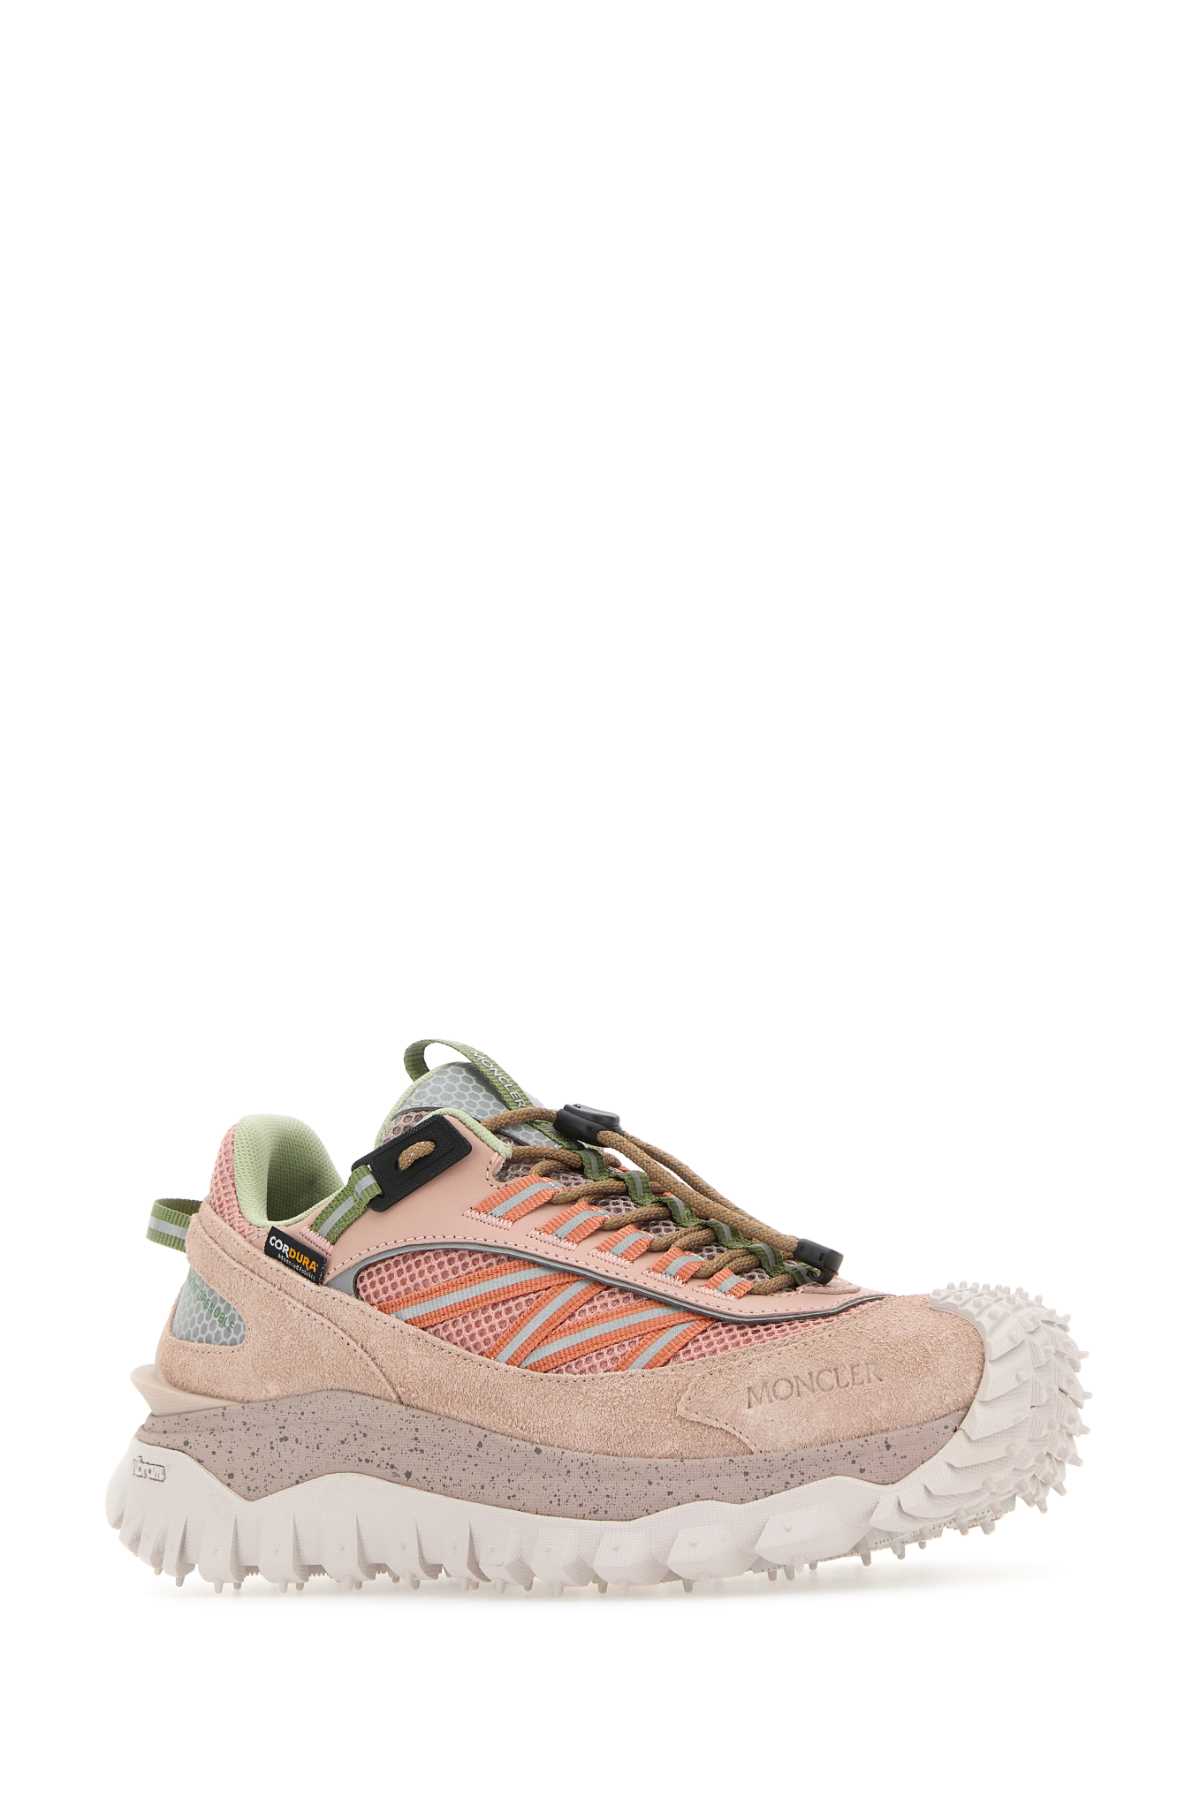 Shop Moncler Multicolor Fabric And Leather Trailgrip Sneakers In 516